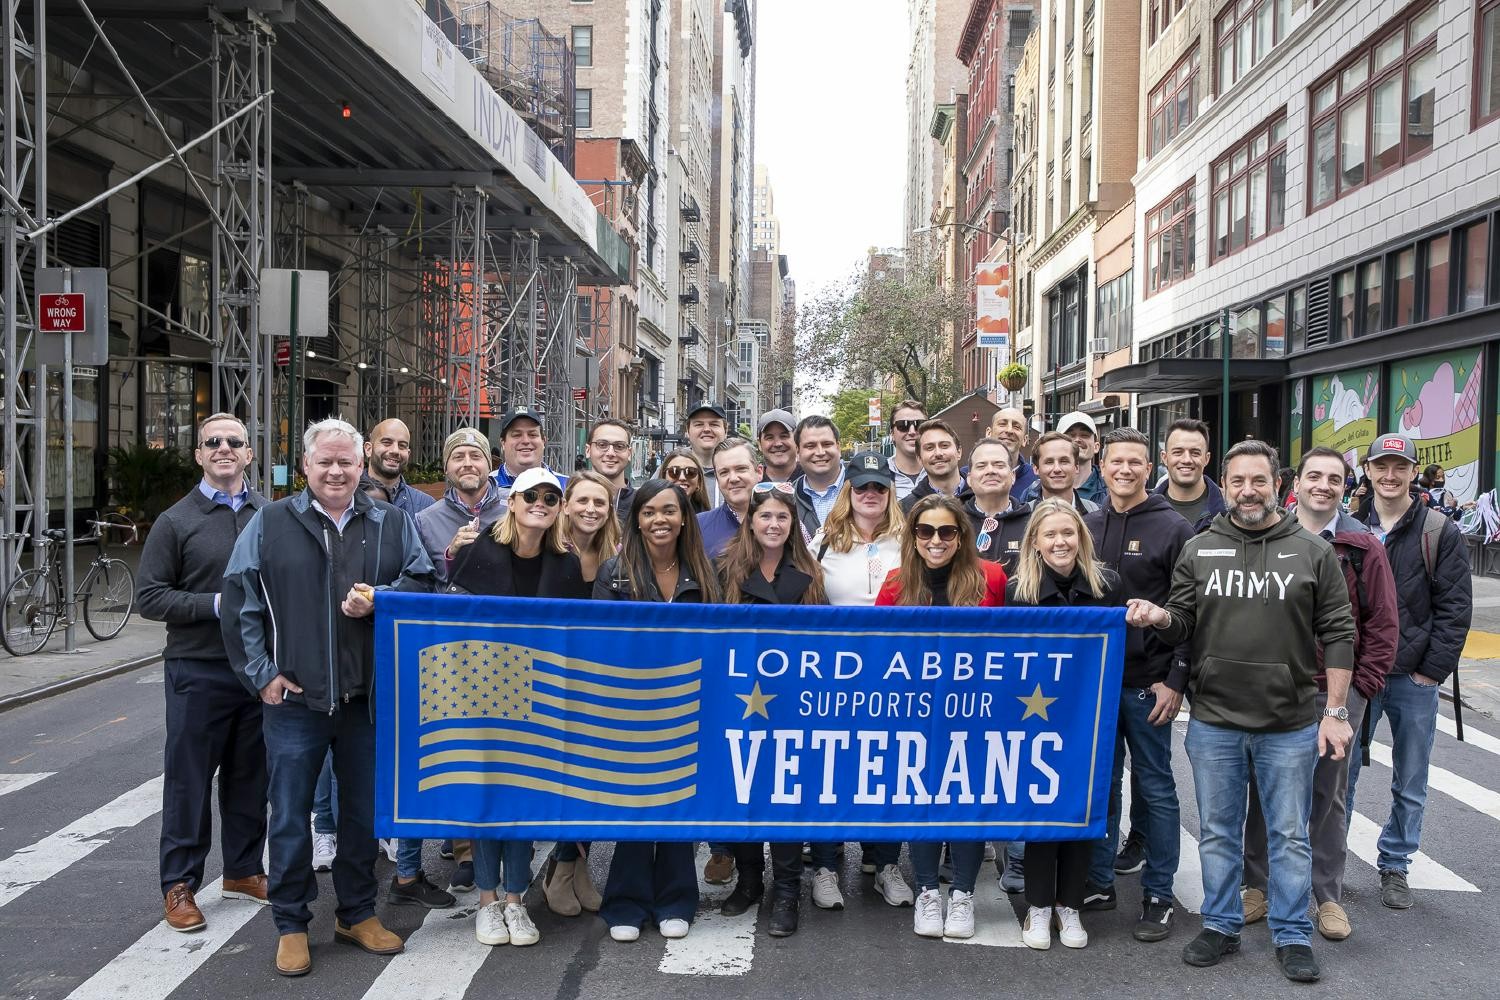 With our Lord Abbett veterans, we participated in the New York City Veterans Day parade to honor service & sacrifice.